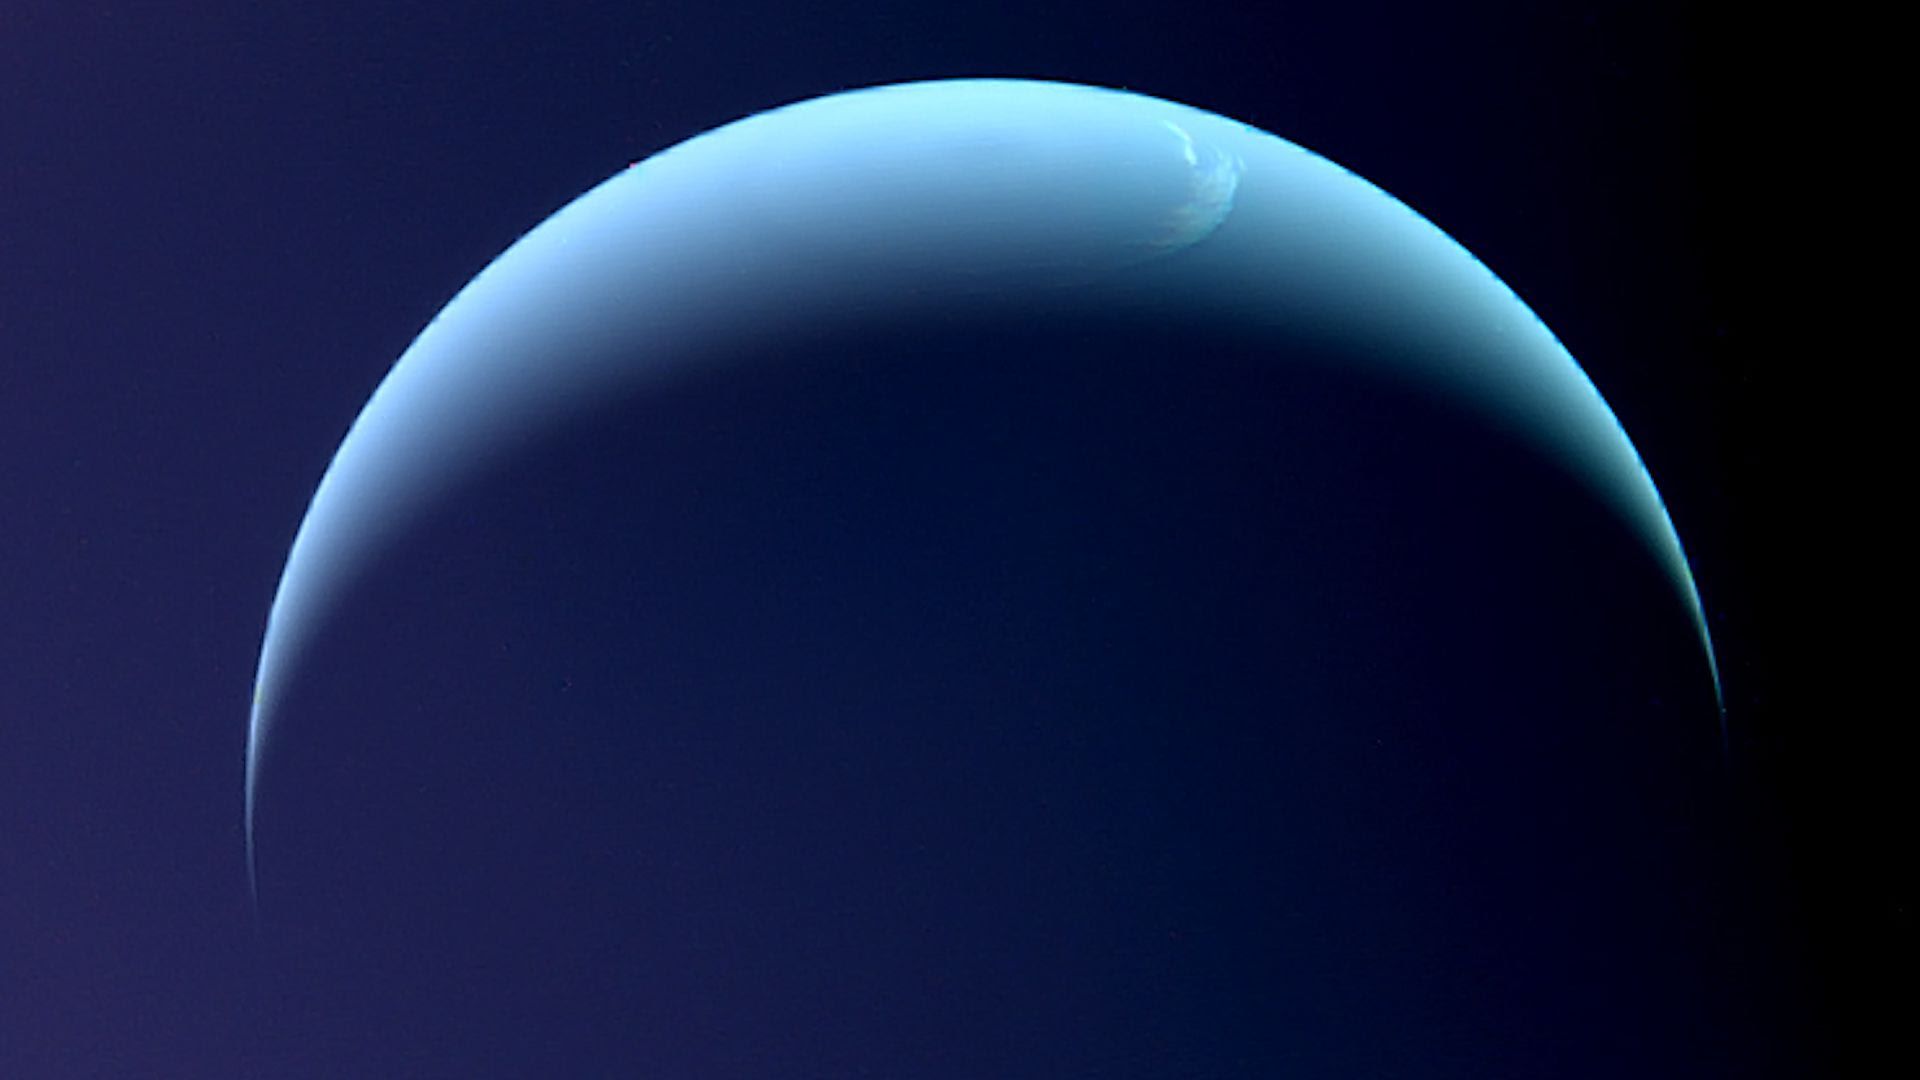 Neptune seen by Voyager 2 in 1989. Photo: NASA/JPL-Caltech/Kevin M. Gill